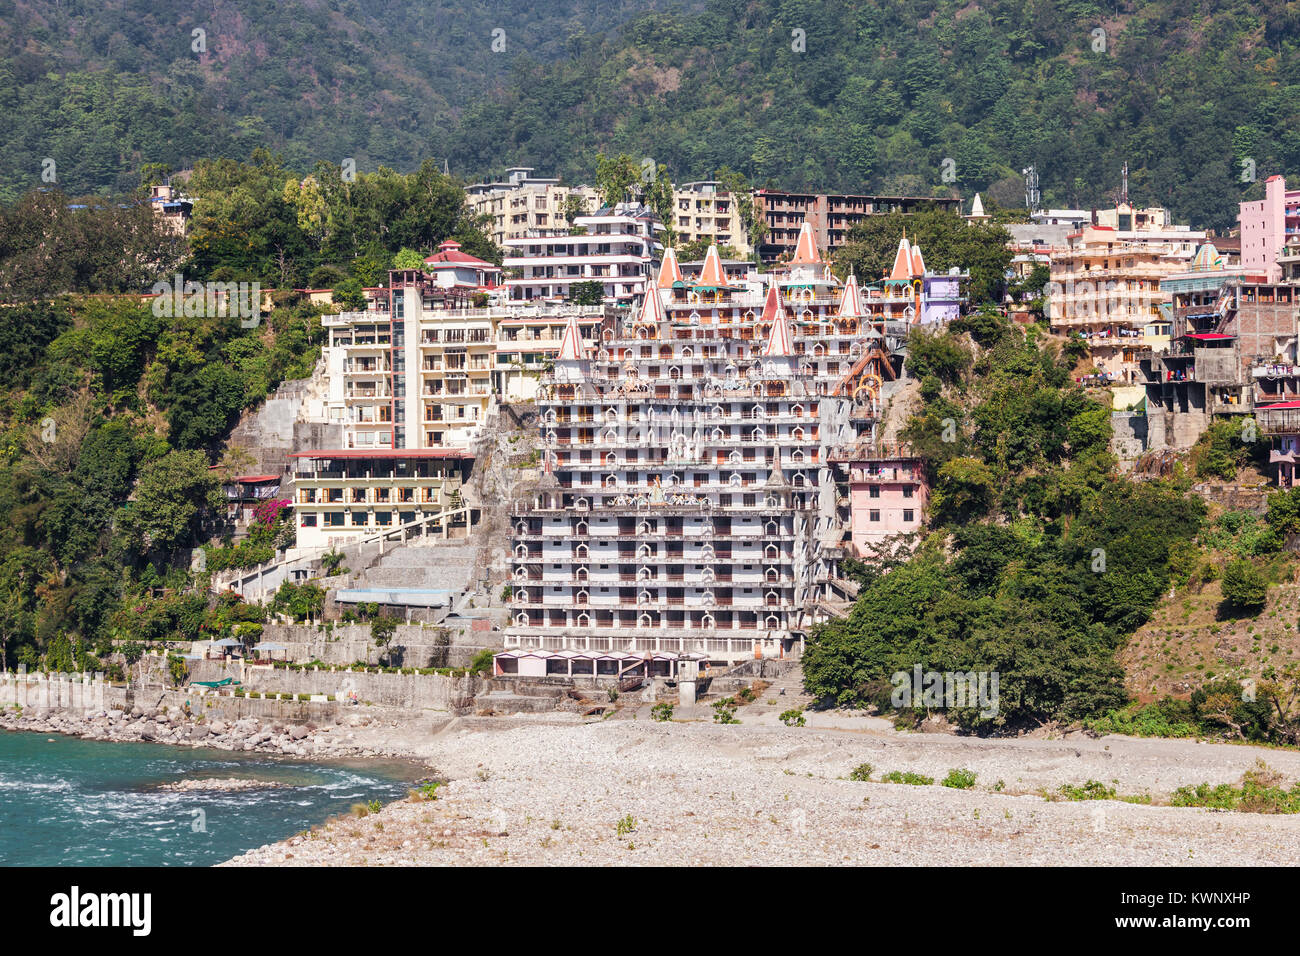 Rishikesh is a city in nothern India, it is known as the Gateway to the Garhwal Himalayas. Stock Photo